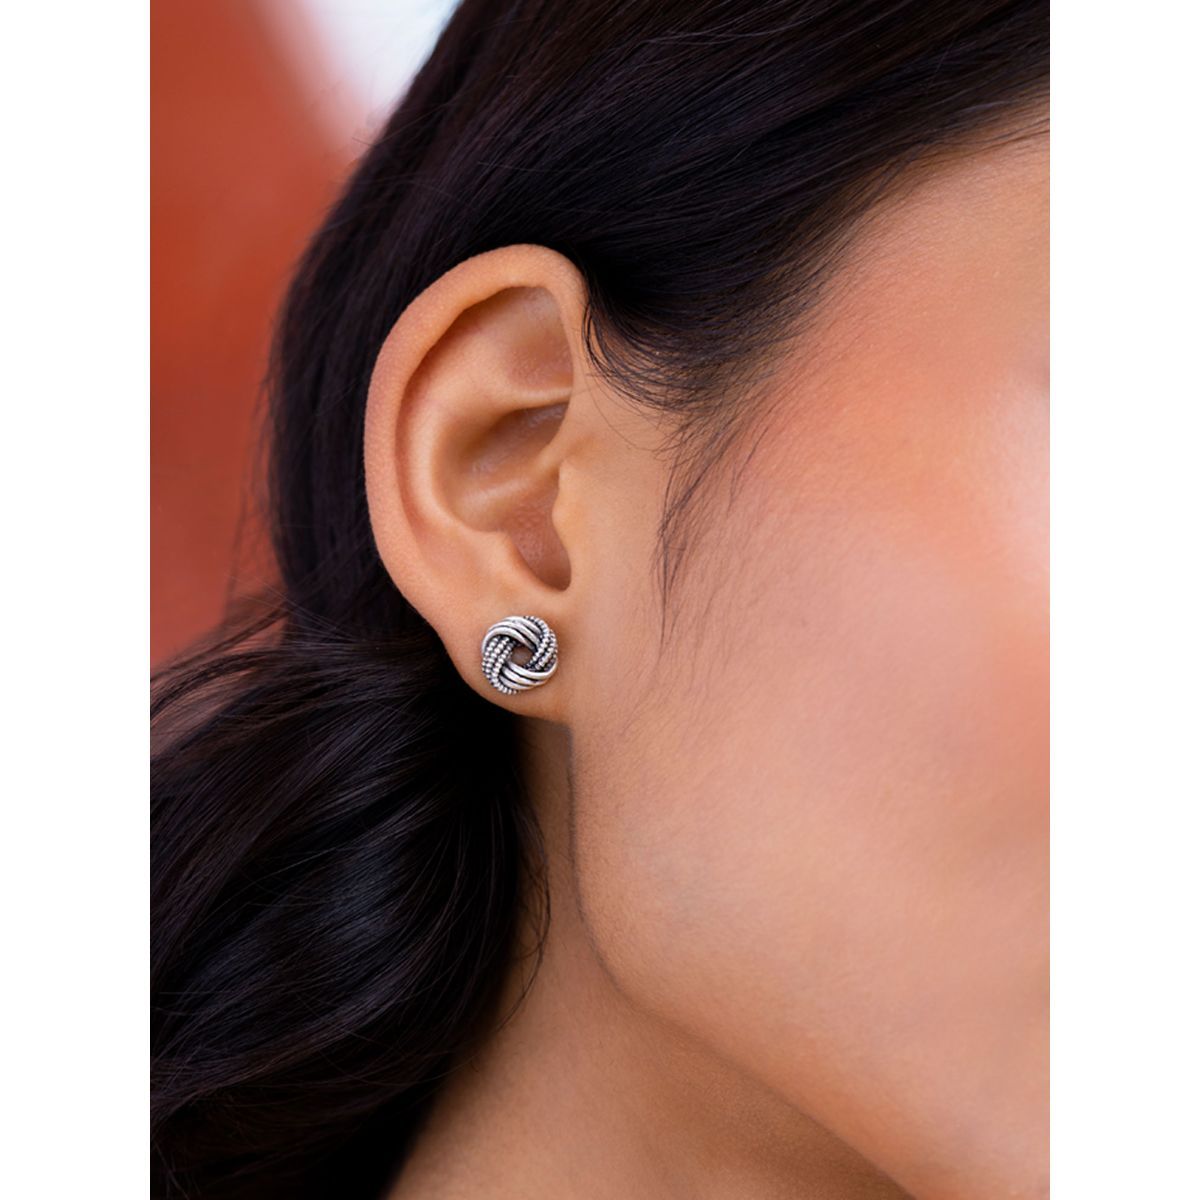 Stylish Colony Barbell Dumbell Silver Earrings With Leaf Stud Bali  Stainless Steel Stud Earring Price in India - Buy Stylish Colony Barbell  Dumbell Silver Earrings With Leaf Stud Bali Stainless Steel Stud